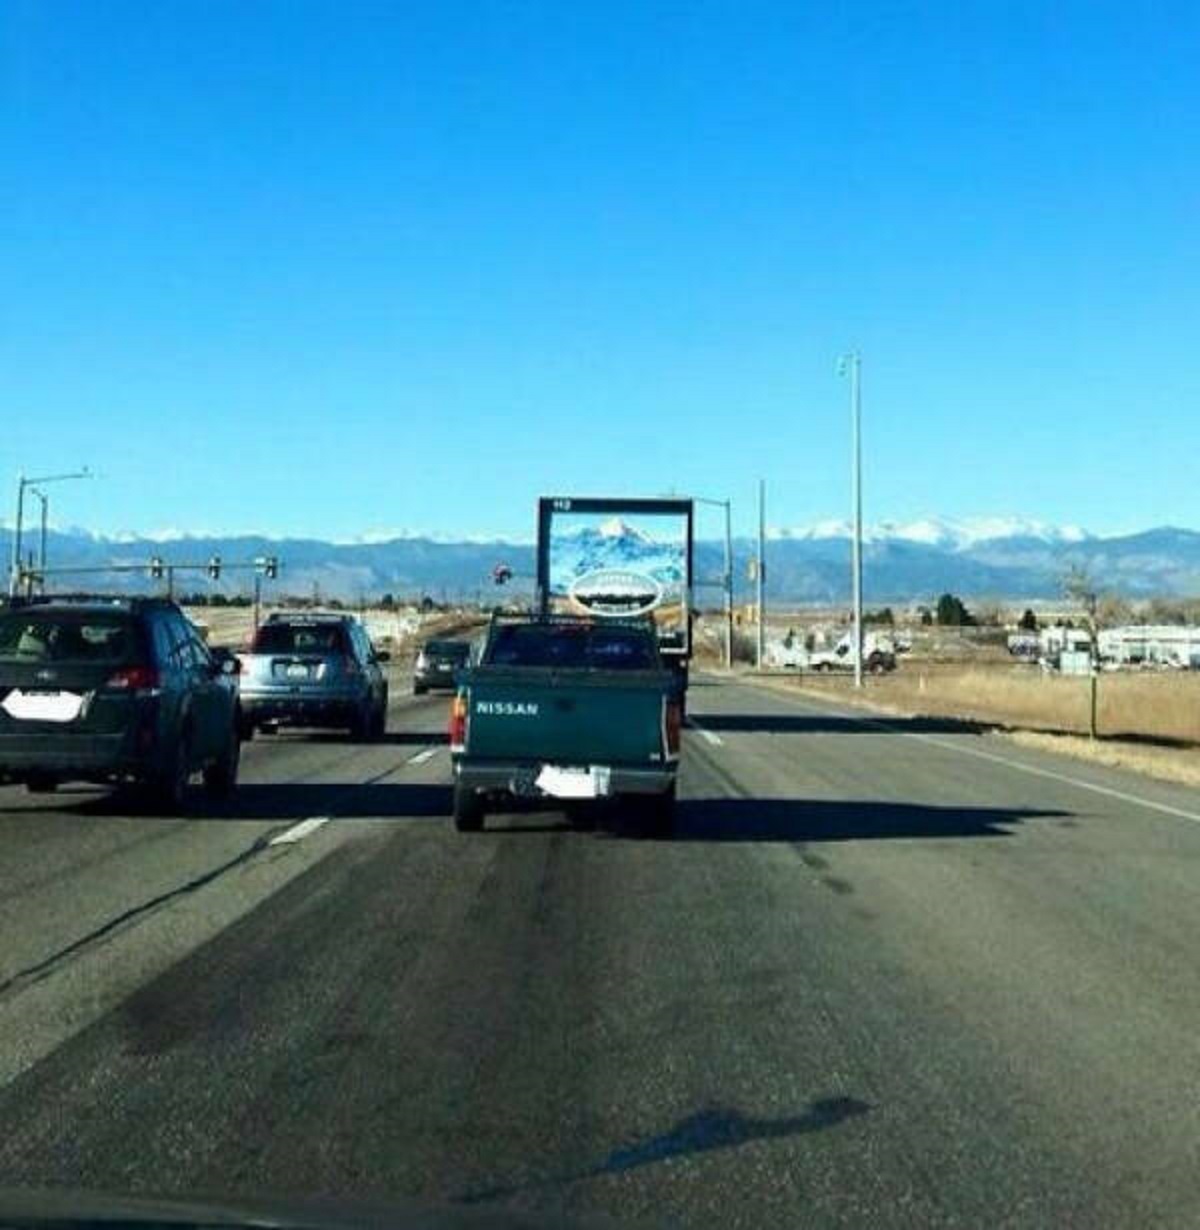 “Truck Lines Up With Rocky Mountains”